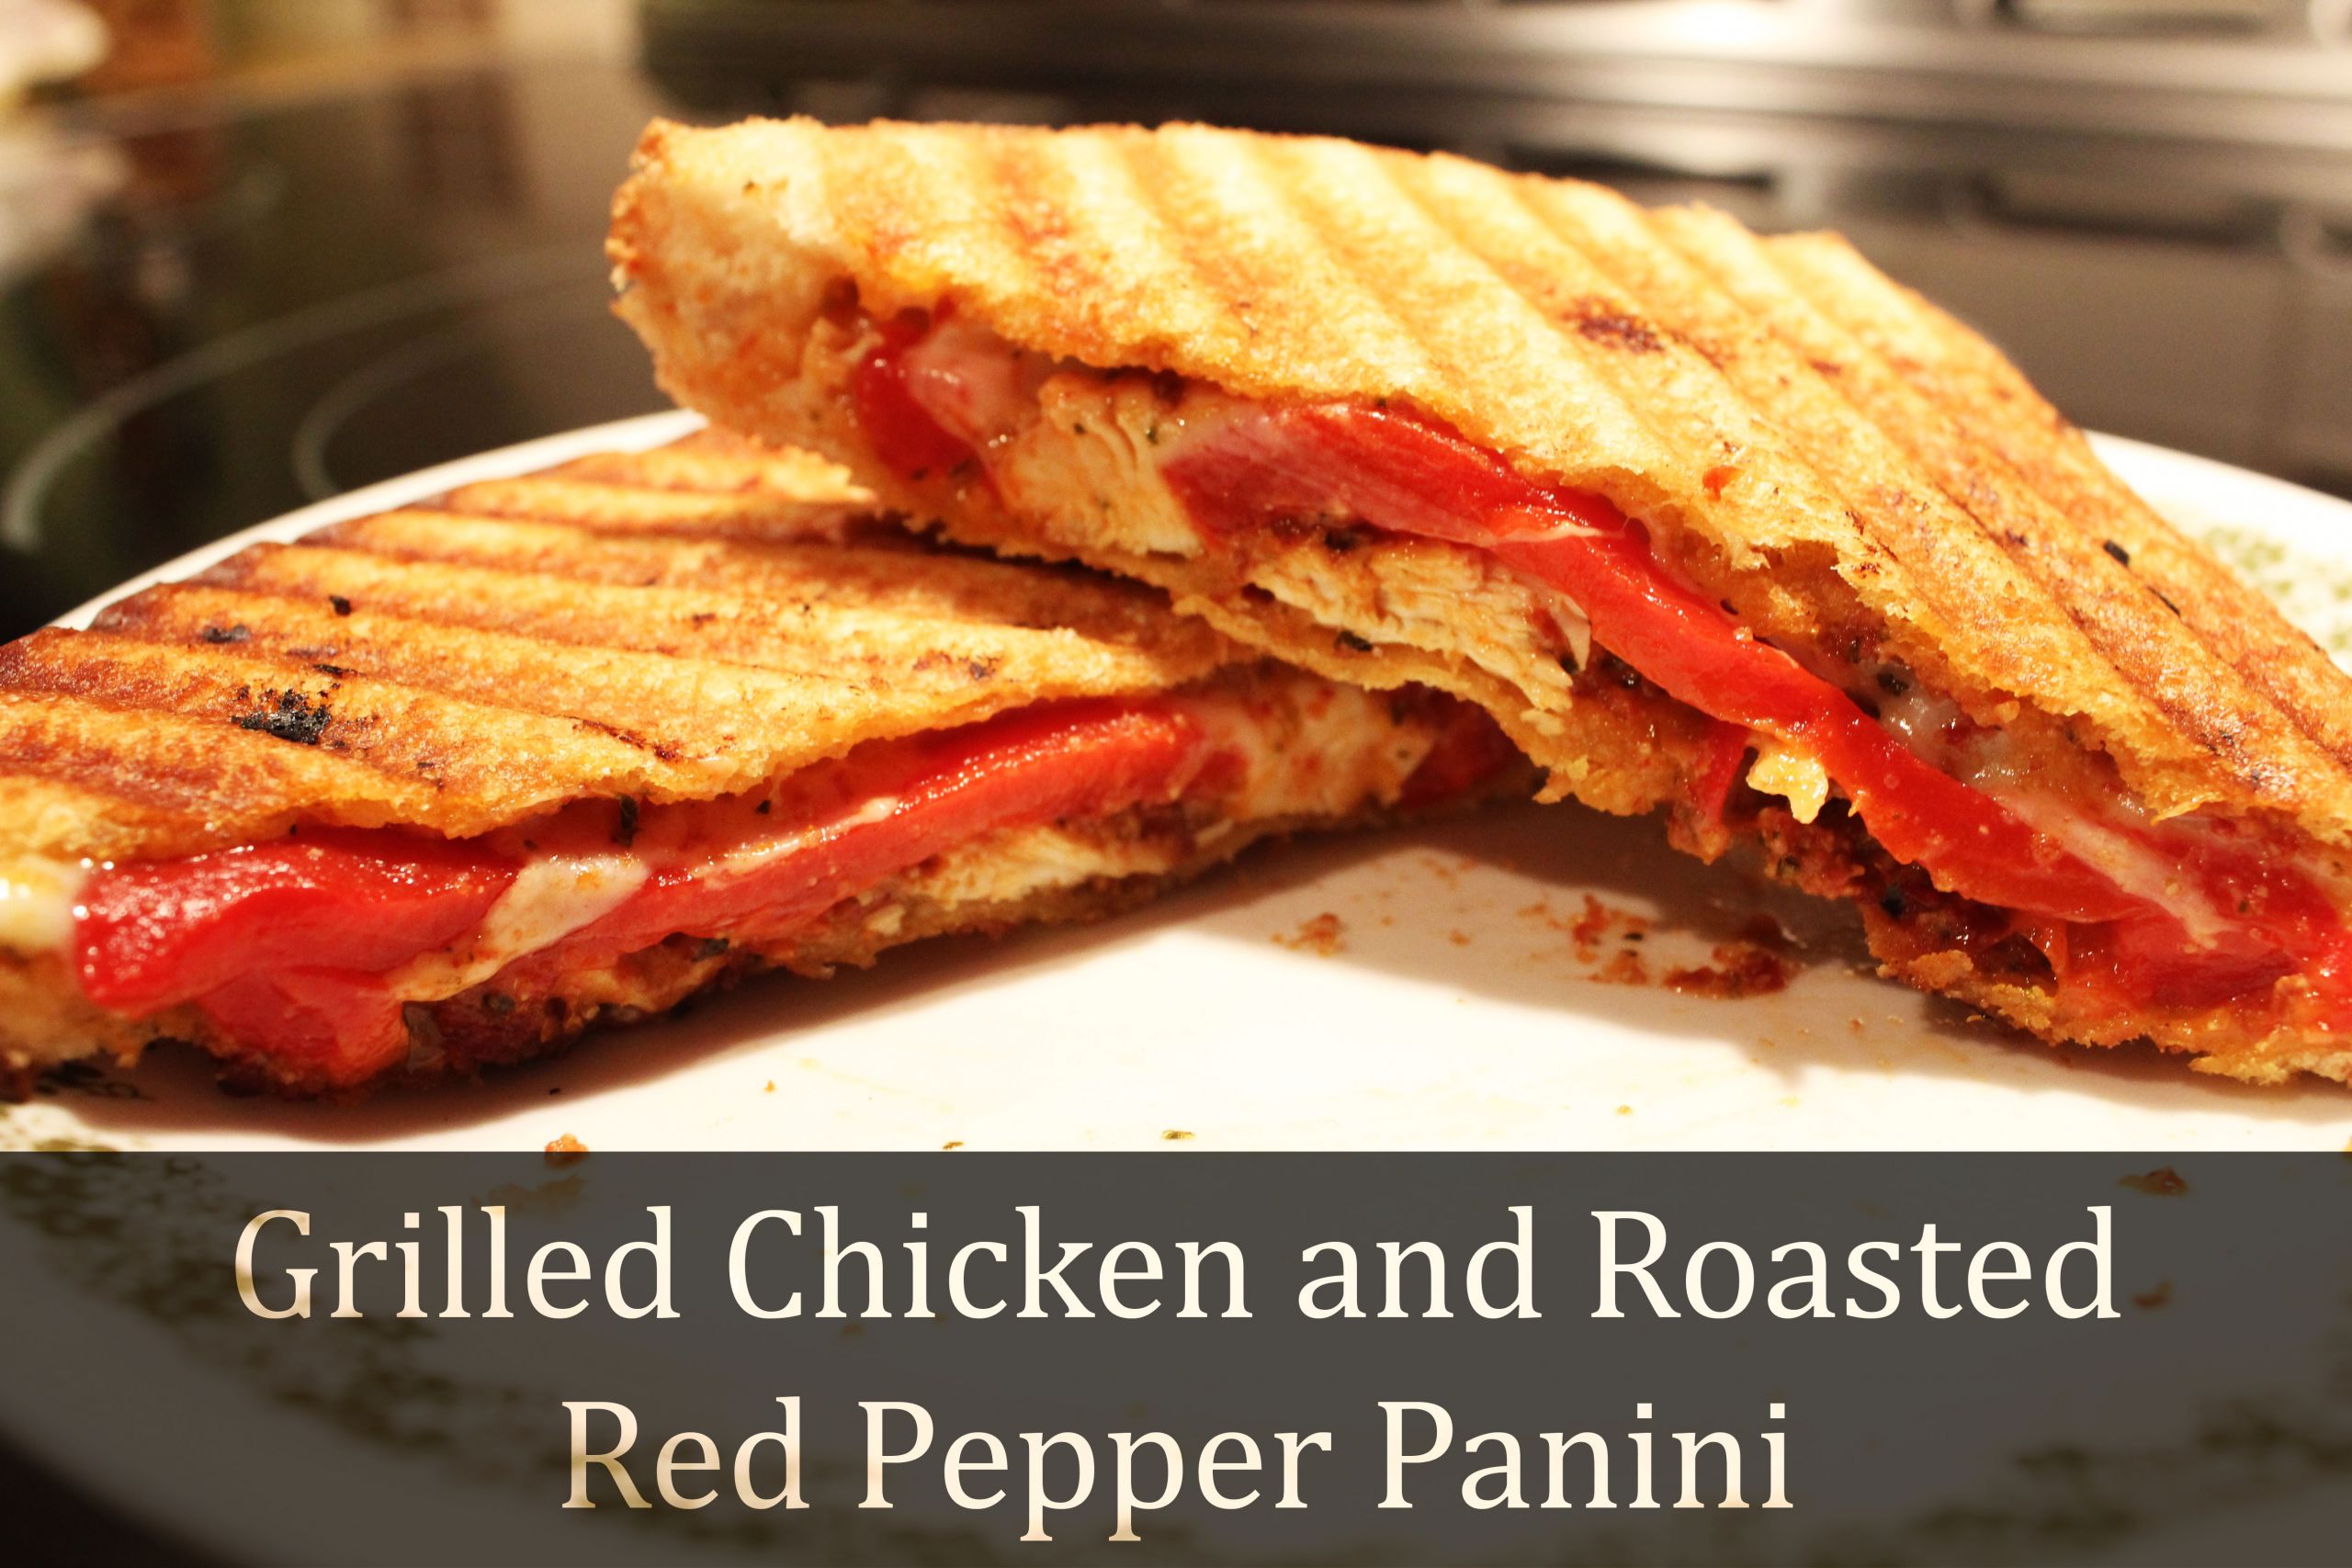 Grilled Chicken Panini Recipes
 Grilled Chicken and Roasted Red Pepper Panini – The